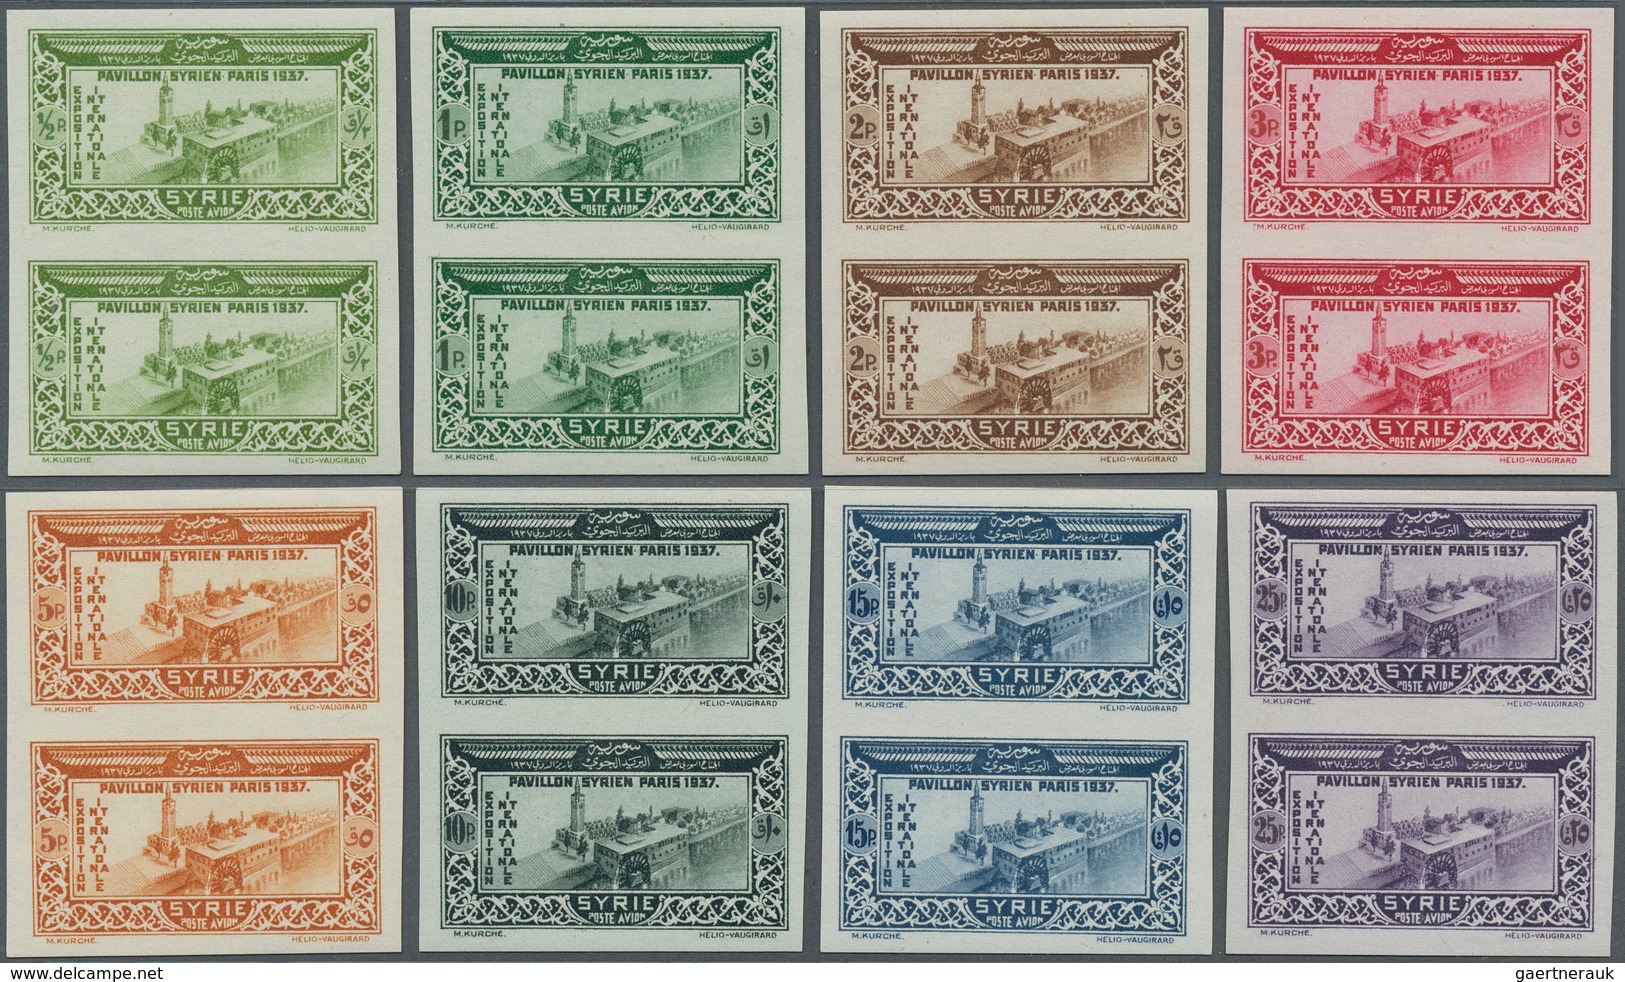 Syrien: 1937, EXPO PARIS Complete Set Of 8 Values Imperf Pairs, Mint Never Hinged In Very Good Quali - Syrie